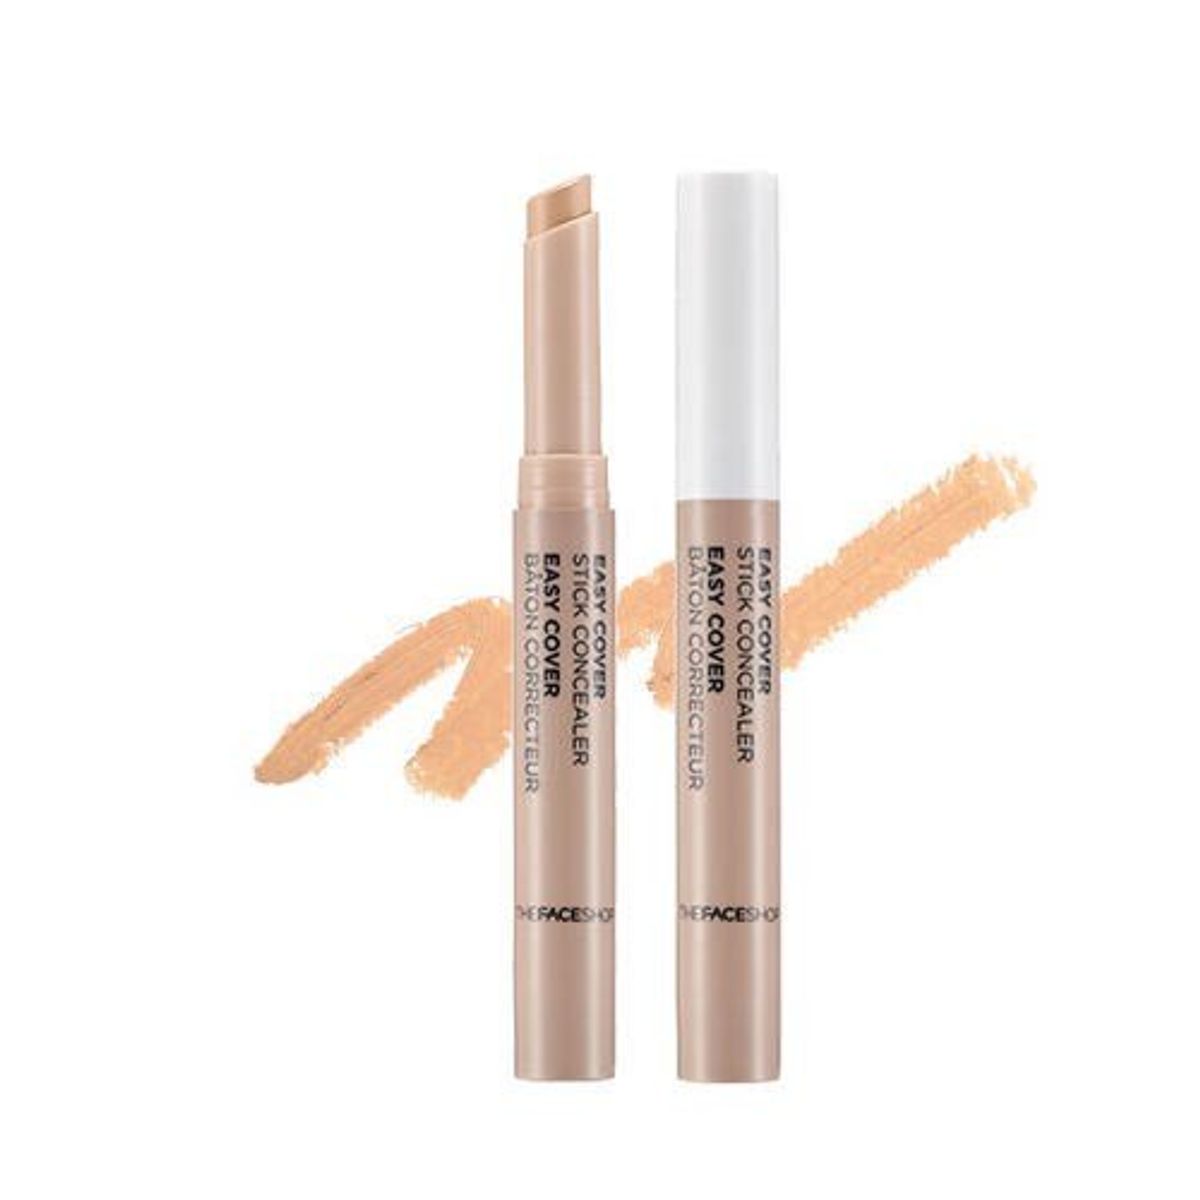 thanh-che-khuyet-diem-tfs-easy-cover-stick-concealer-1-2